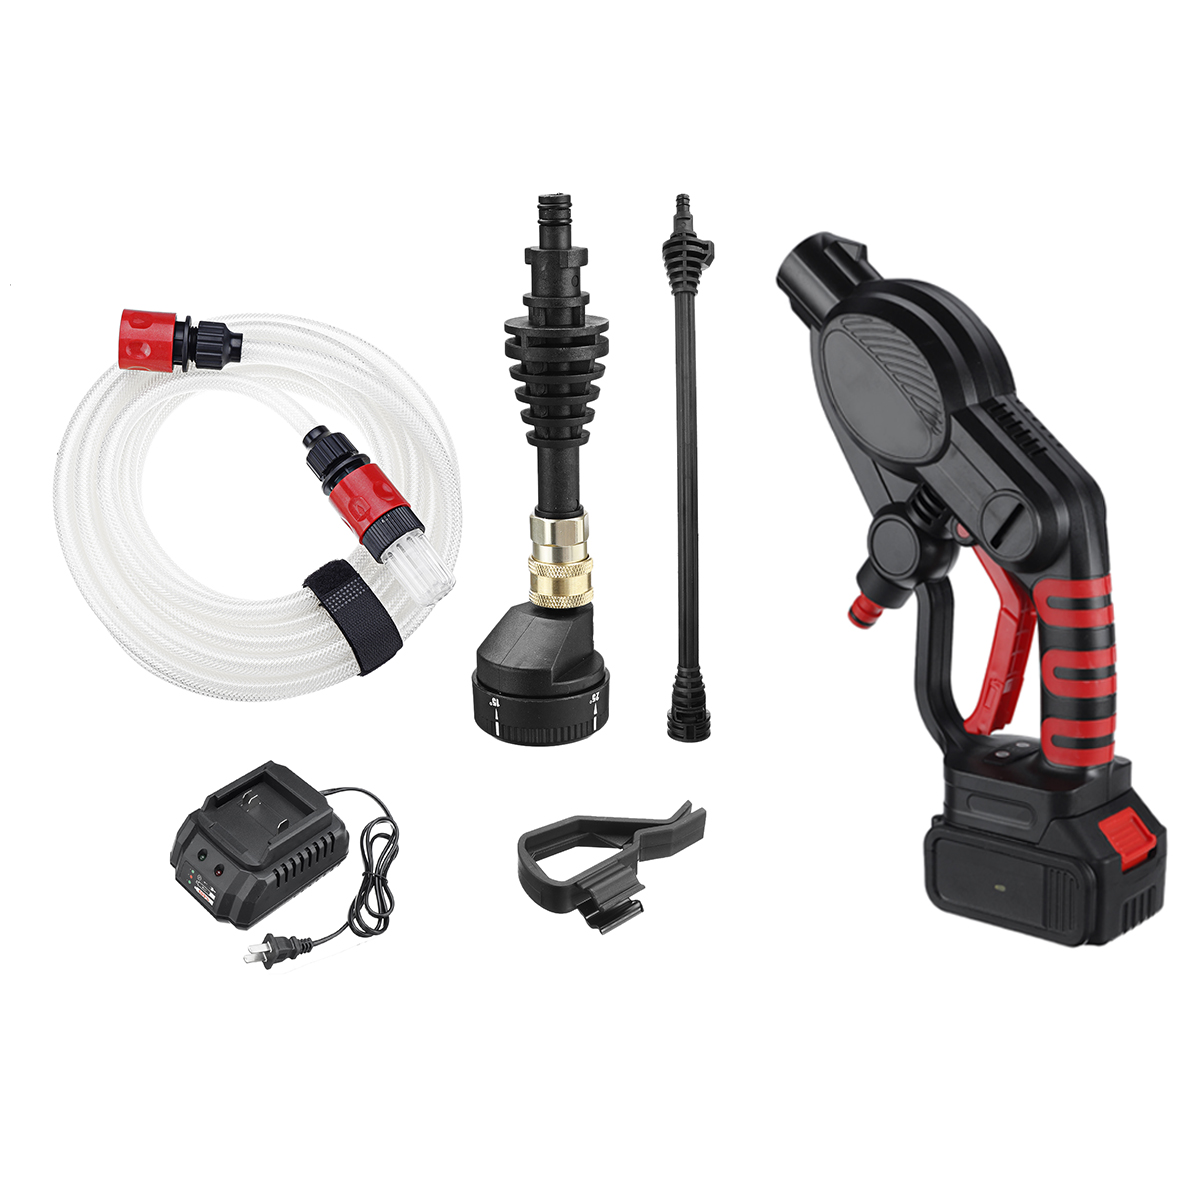 21V-20Ah-Multifunctional-Cordless-Pressure-Cleaner-Washer-Sprayer-Water-Hose-Nozzle-Pump-with-Batter-1292573-8